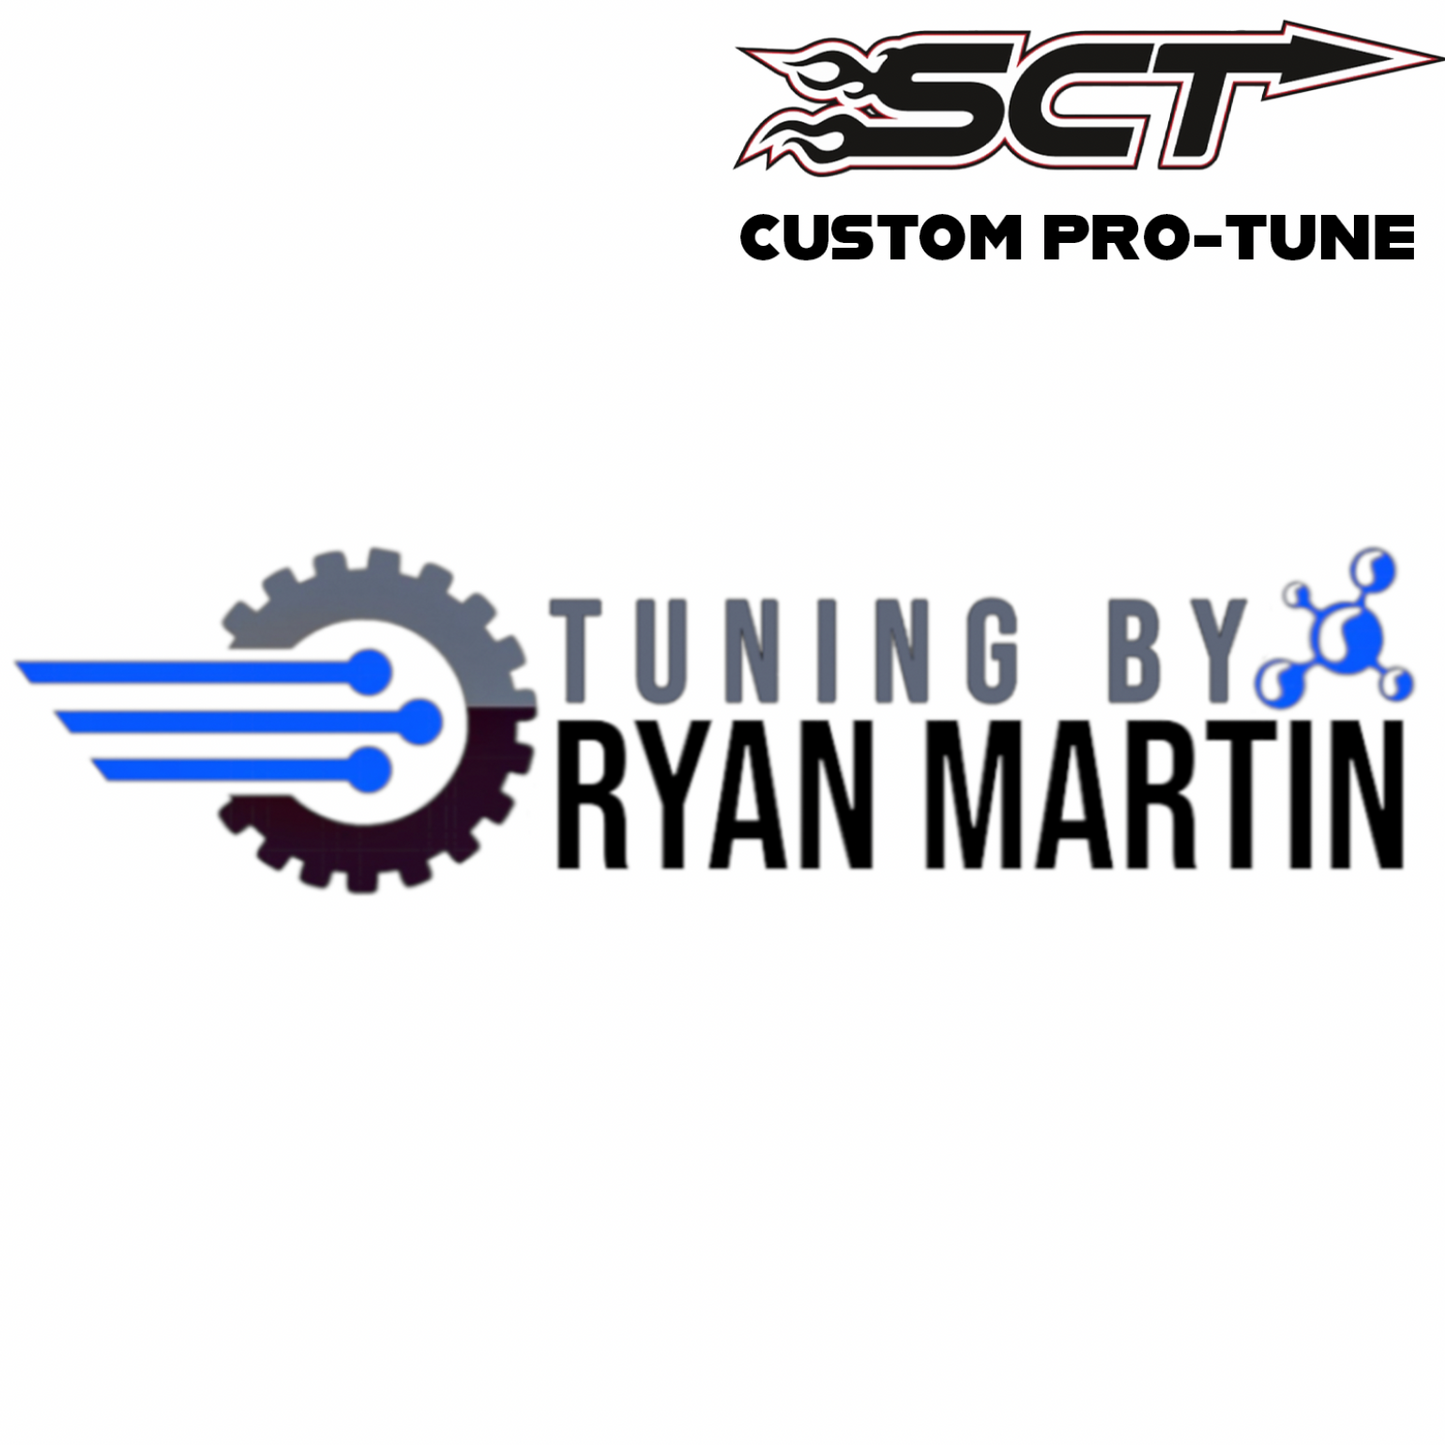 EMS Tuning Ecoboost Mustang Pro Tuning via SCT Tuning Devices